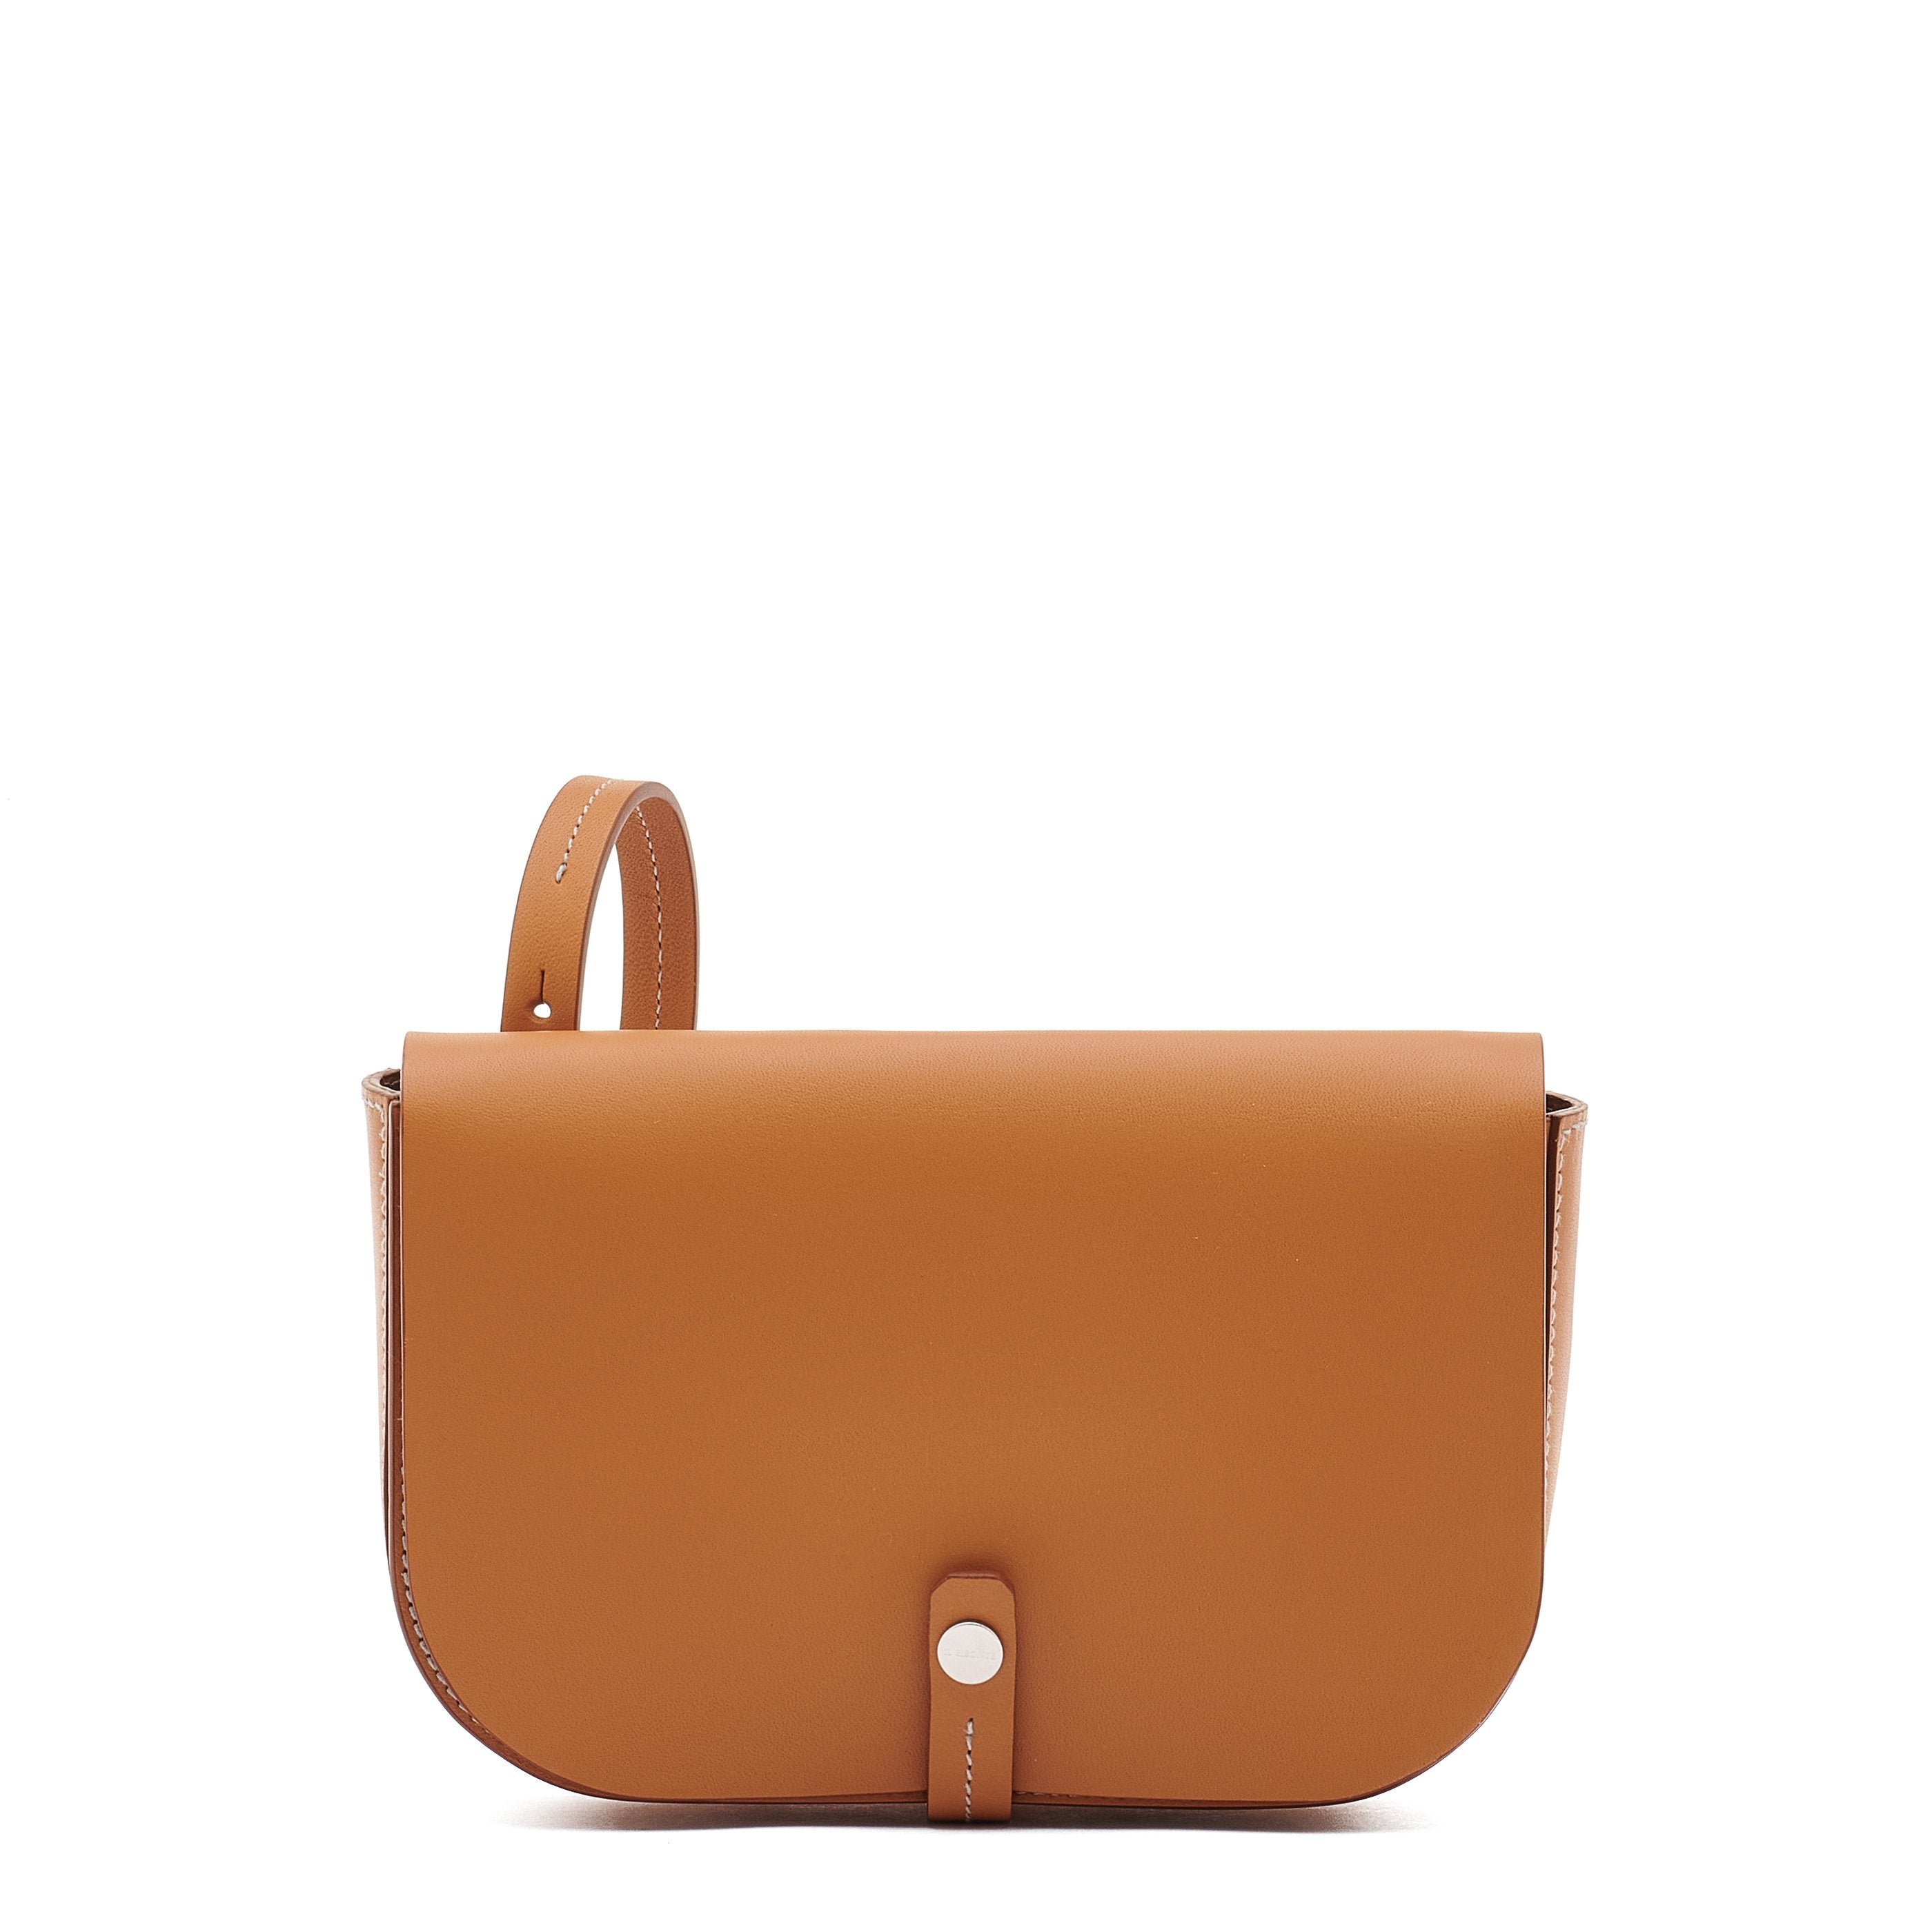 Piccarda Small | Women's crossbody bag in leather color natural